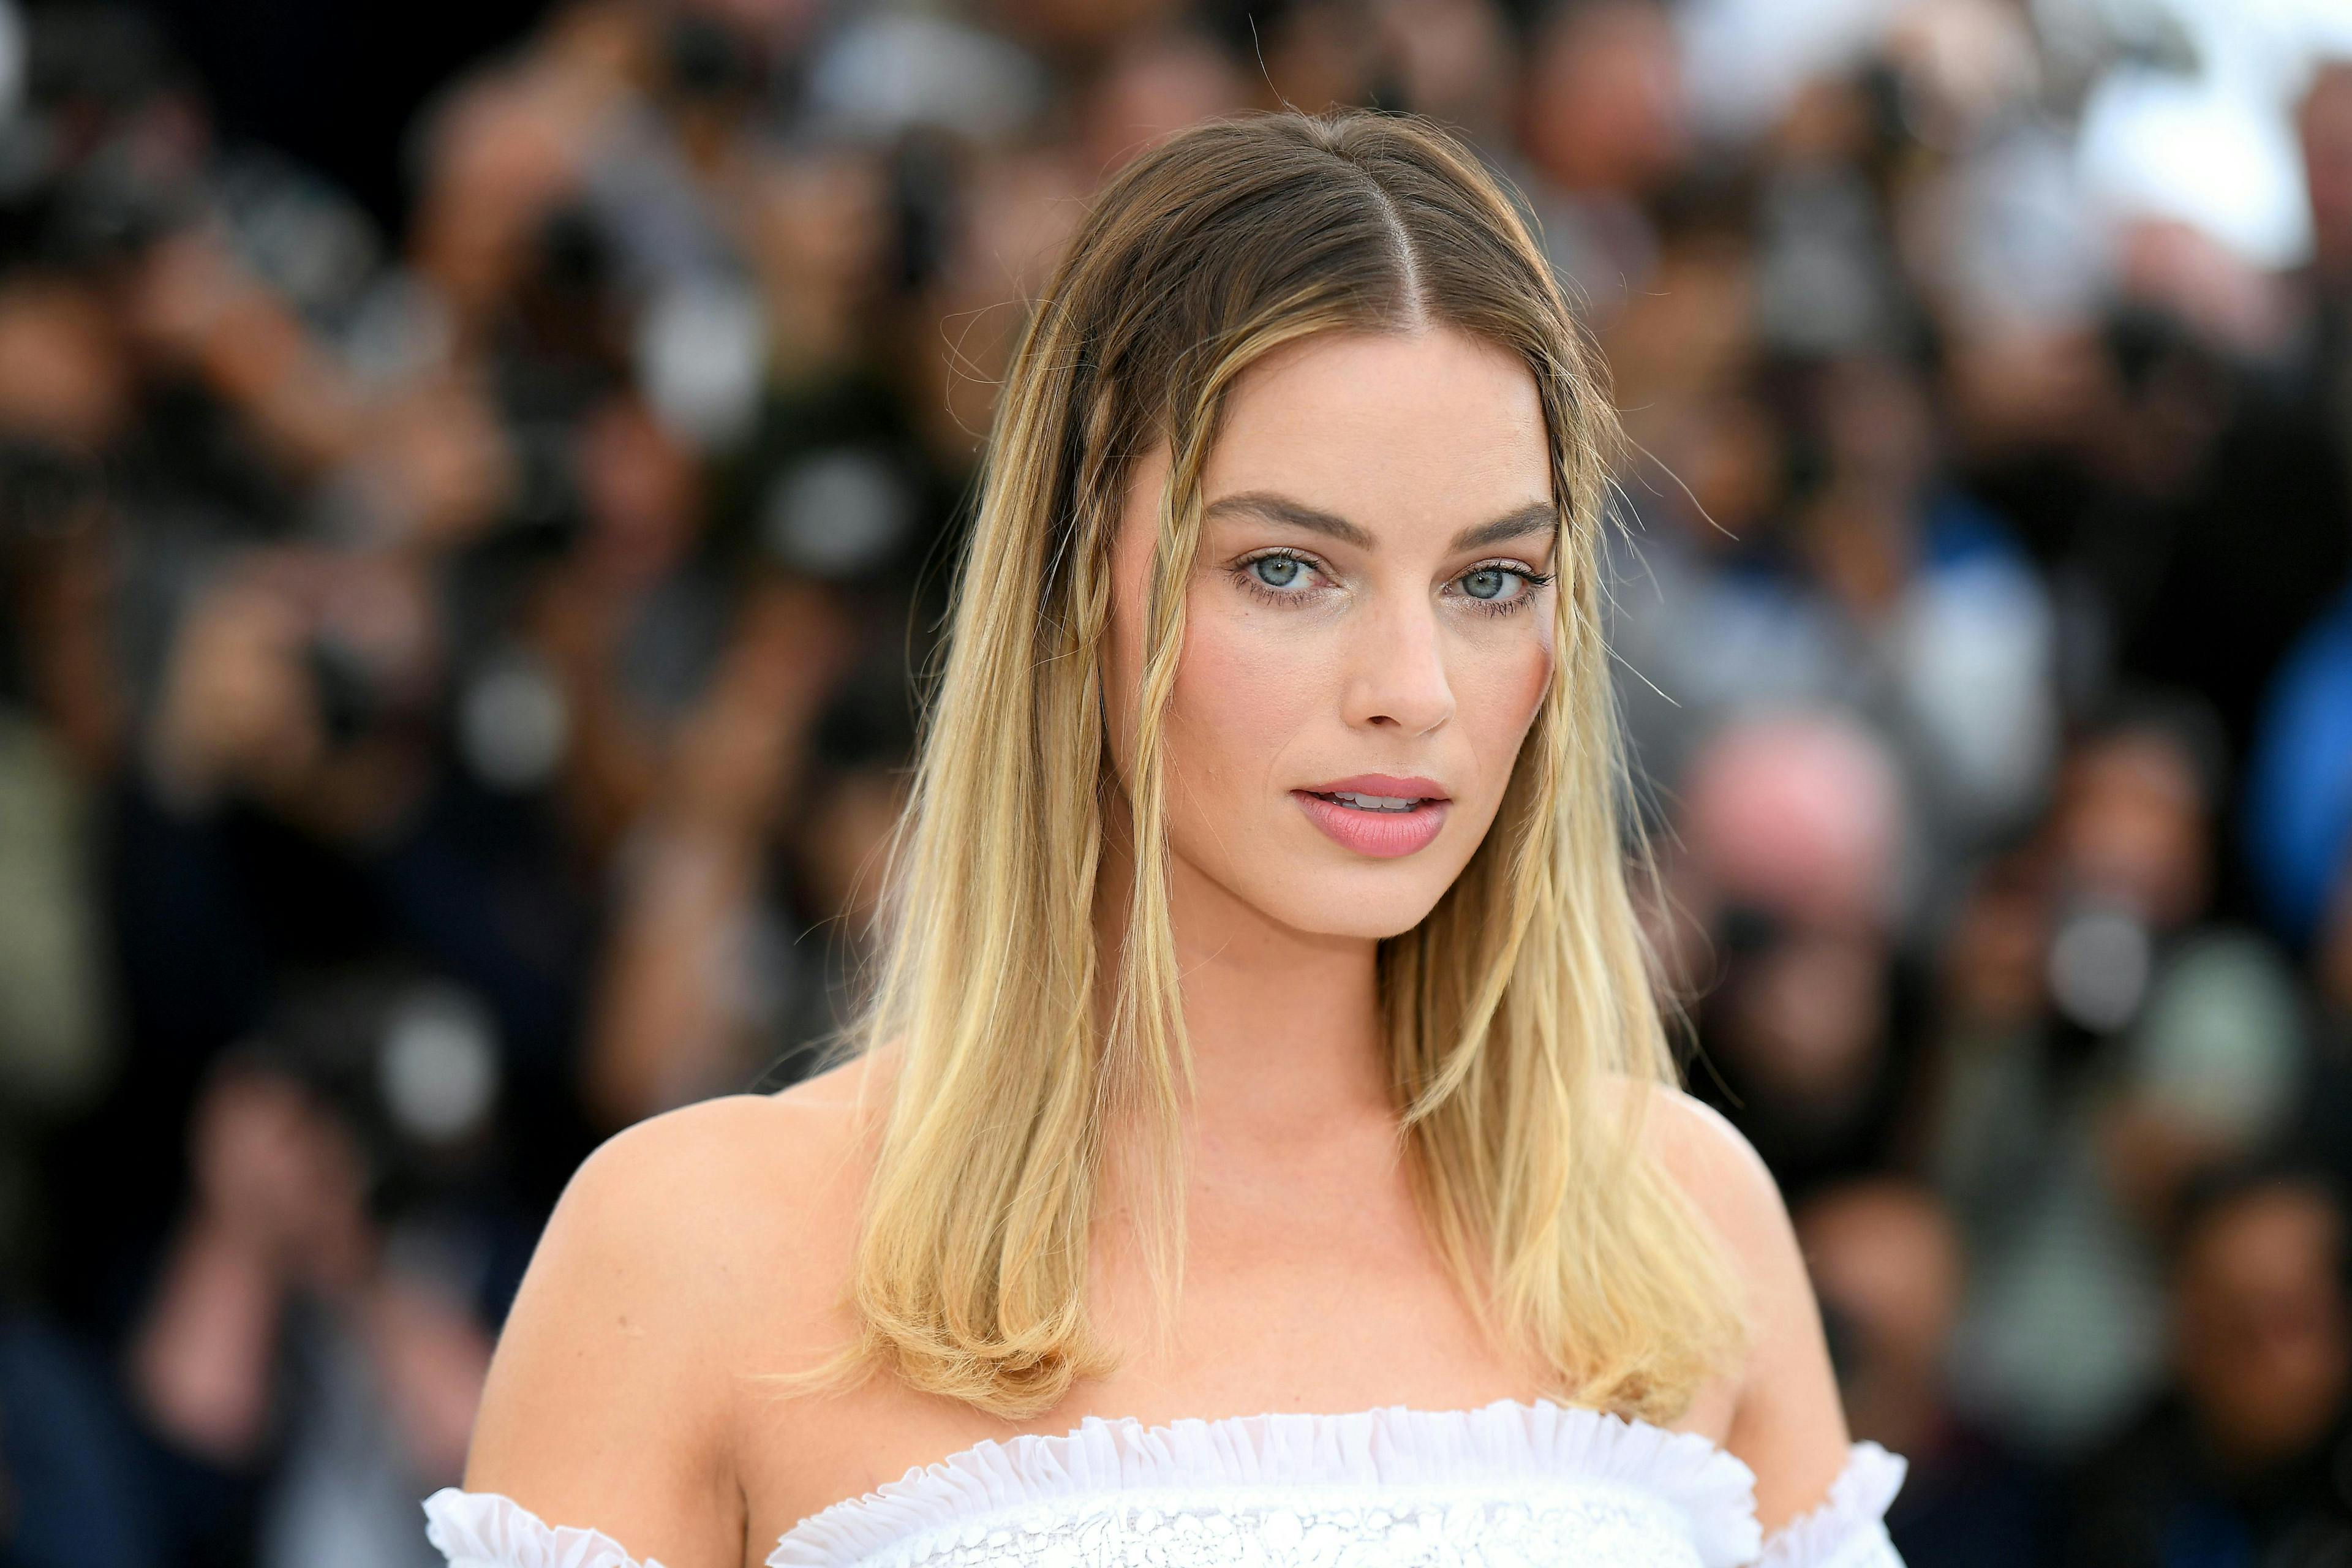 Actress Margot Robbie at the 72nd annual Cannes Film Festival in 2019